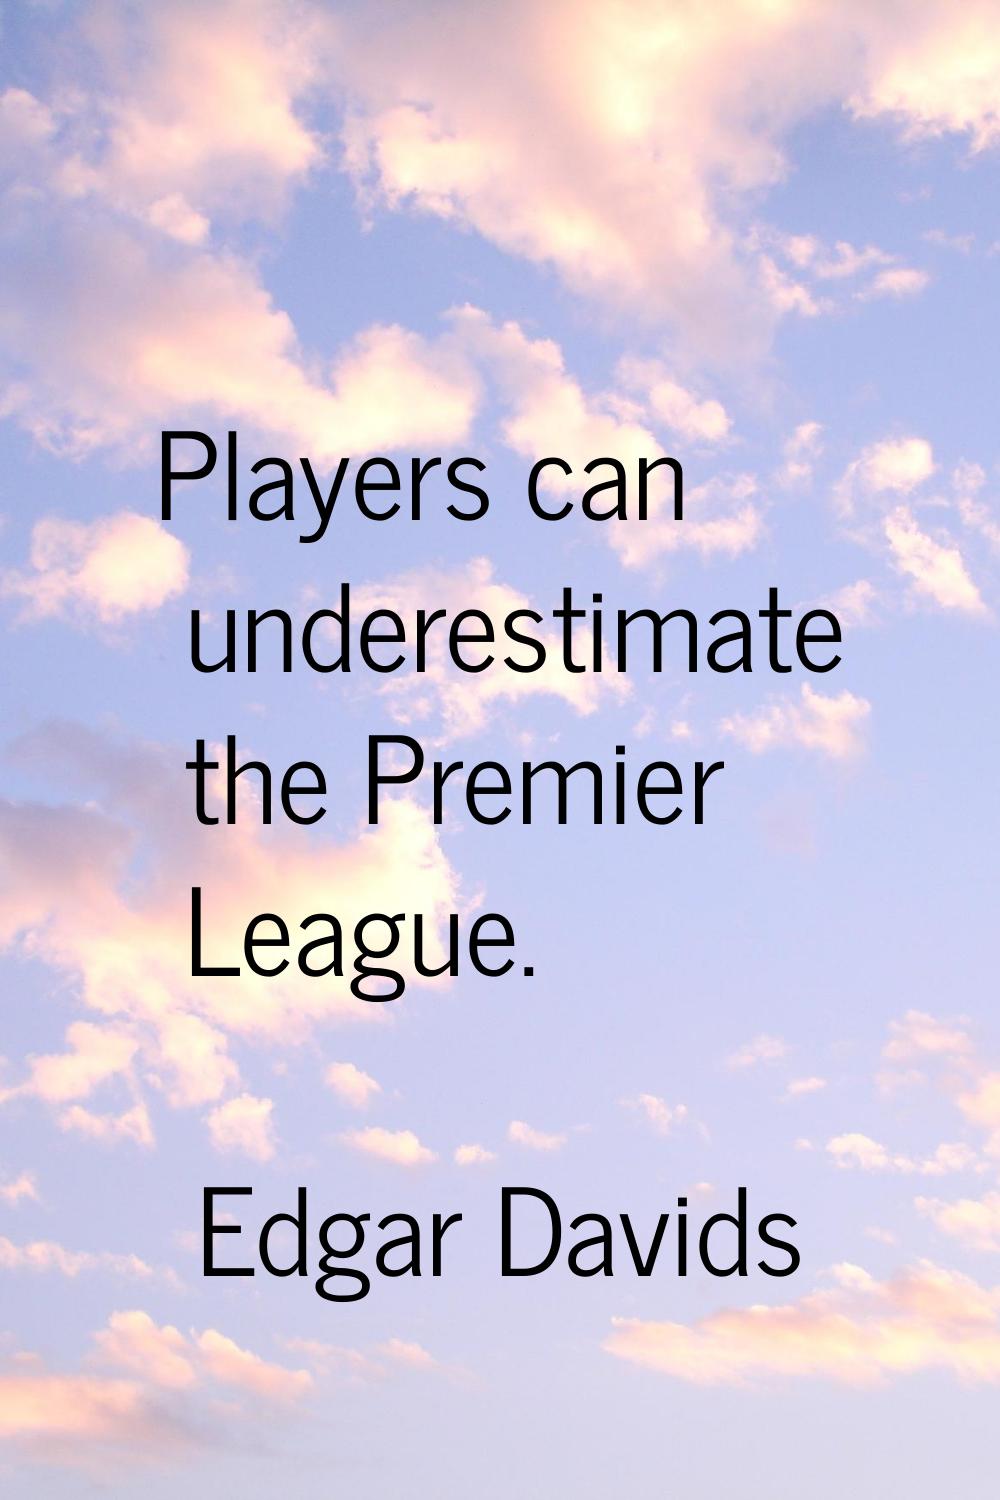 Players can underestimate the Premier League.